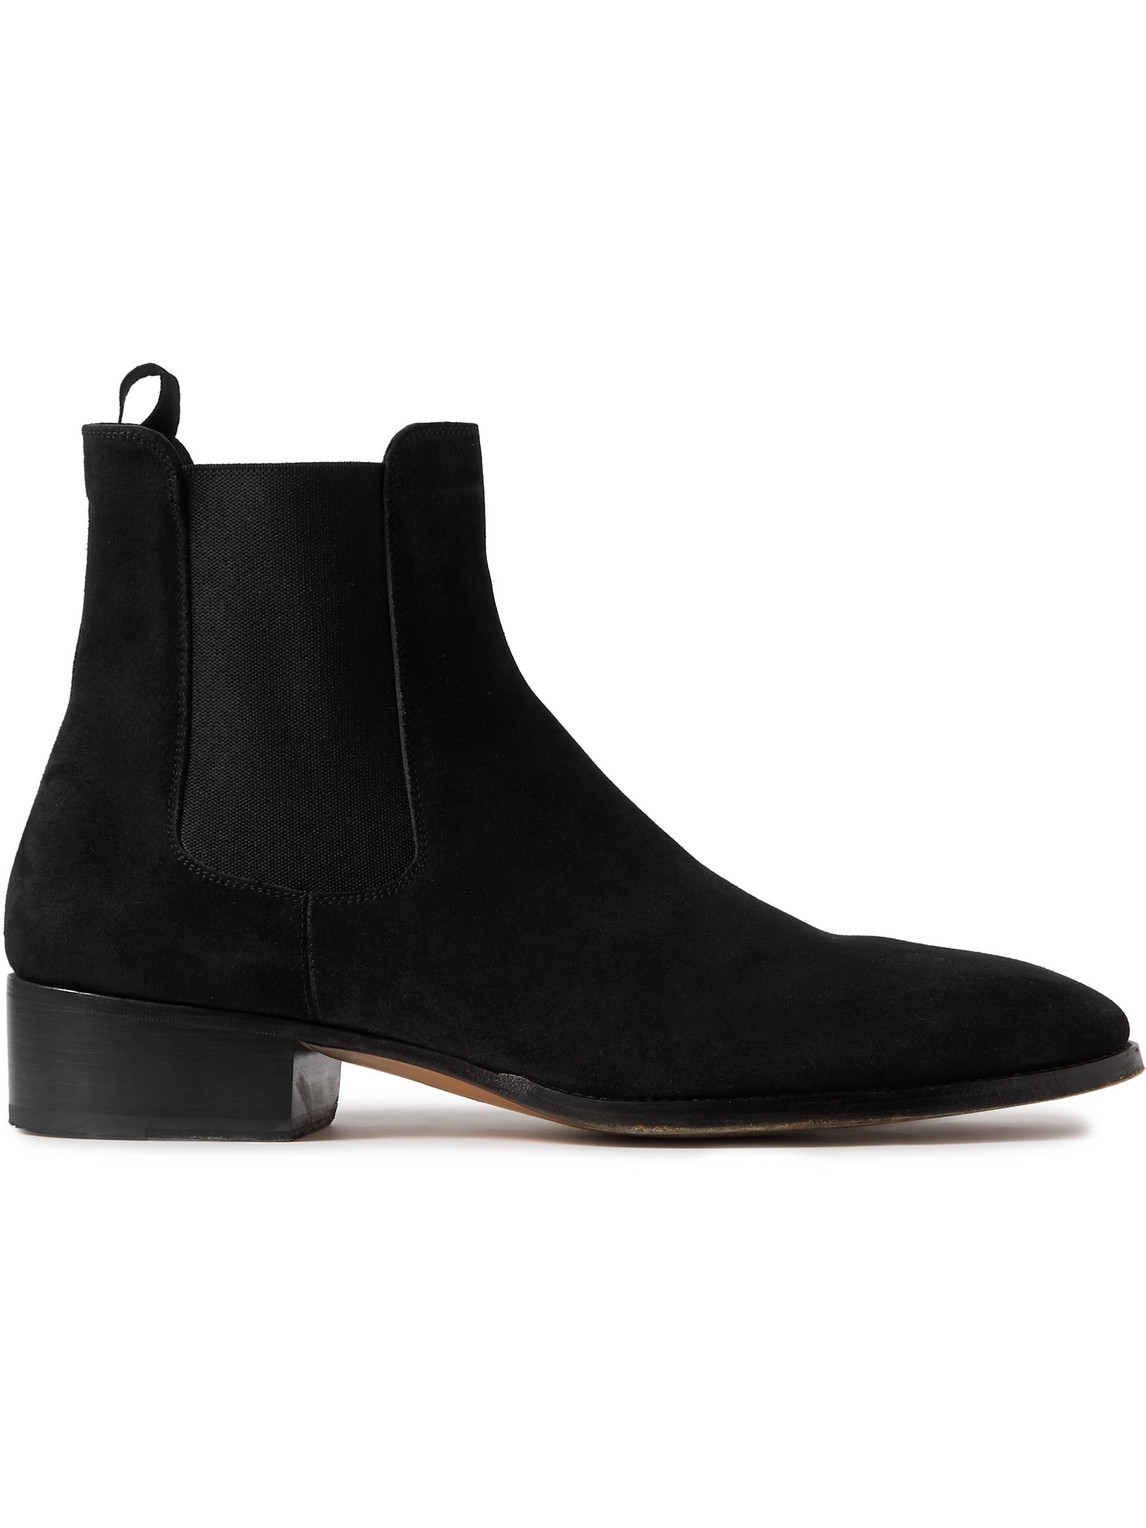 Tom Ford Alec Suede Chelsea Boots In Black